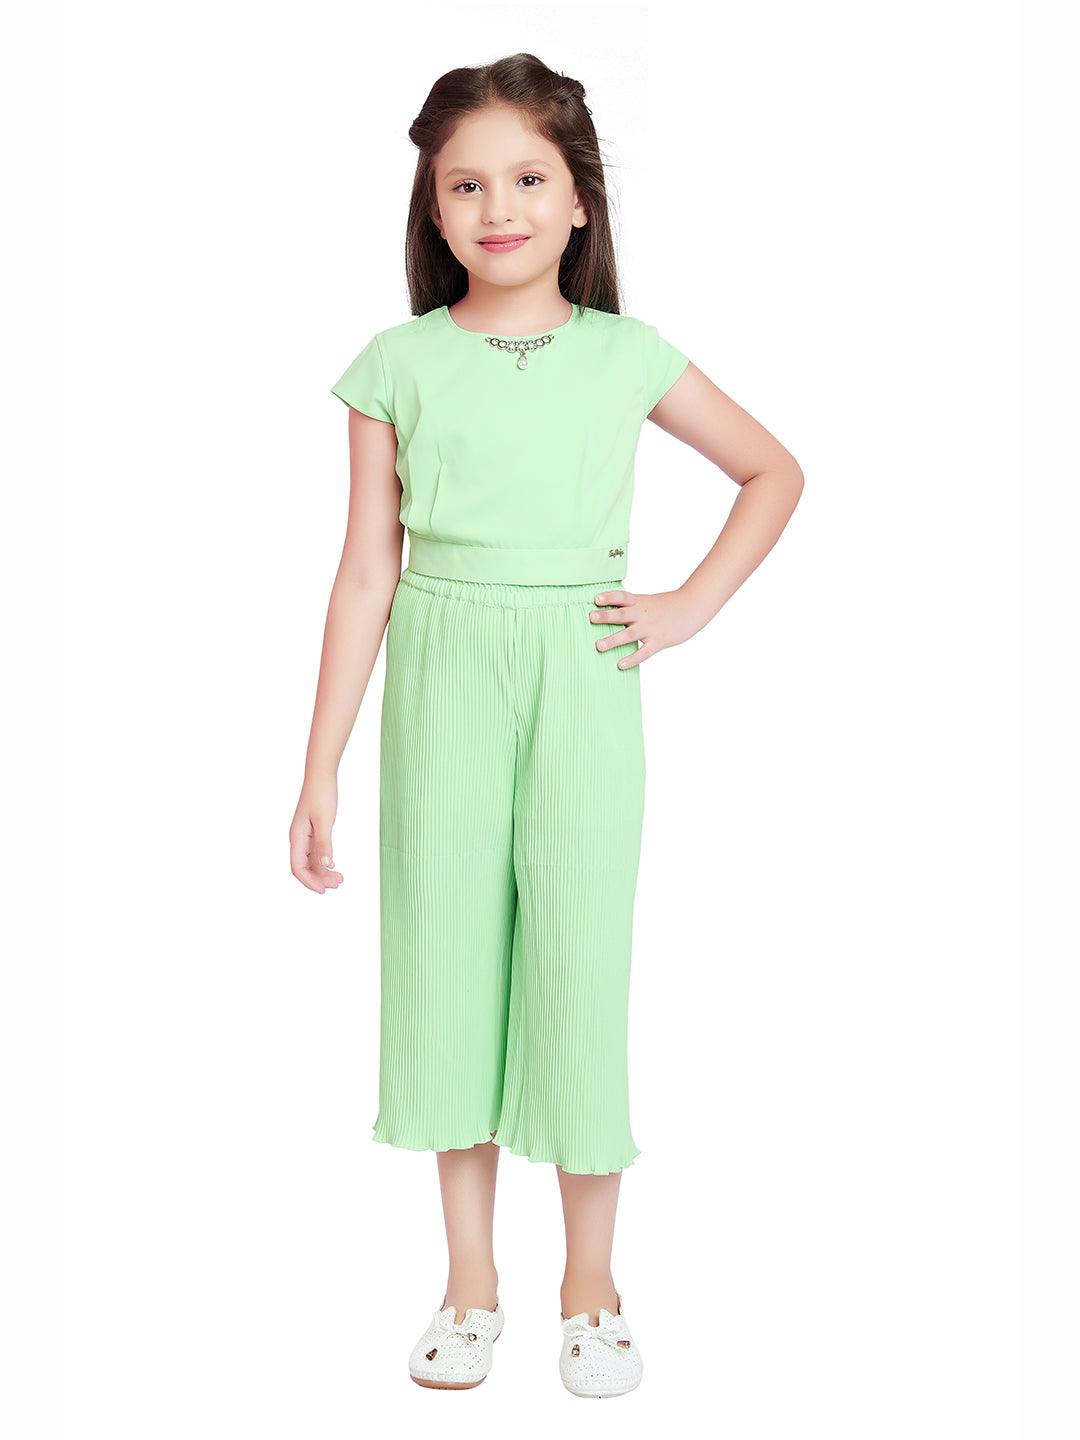 Tiny Baby Sky Blue Colored Culottes- 2091 Neon Green - TINY BABY INDIA shop.tinybaby.in